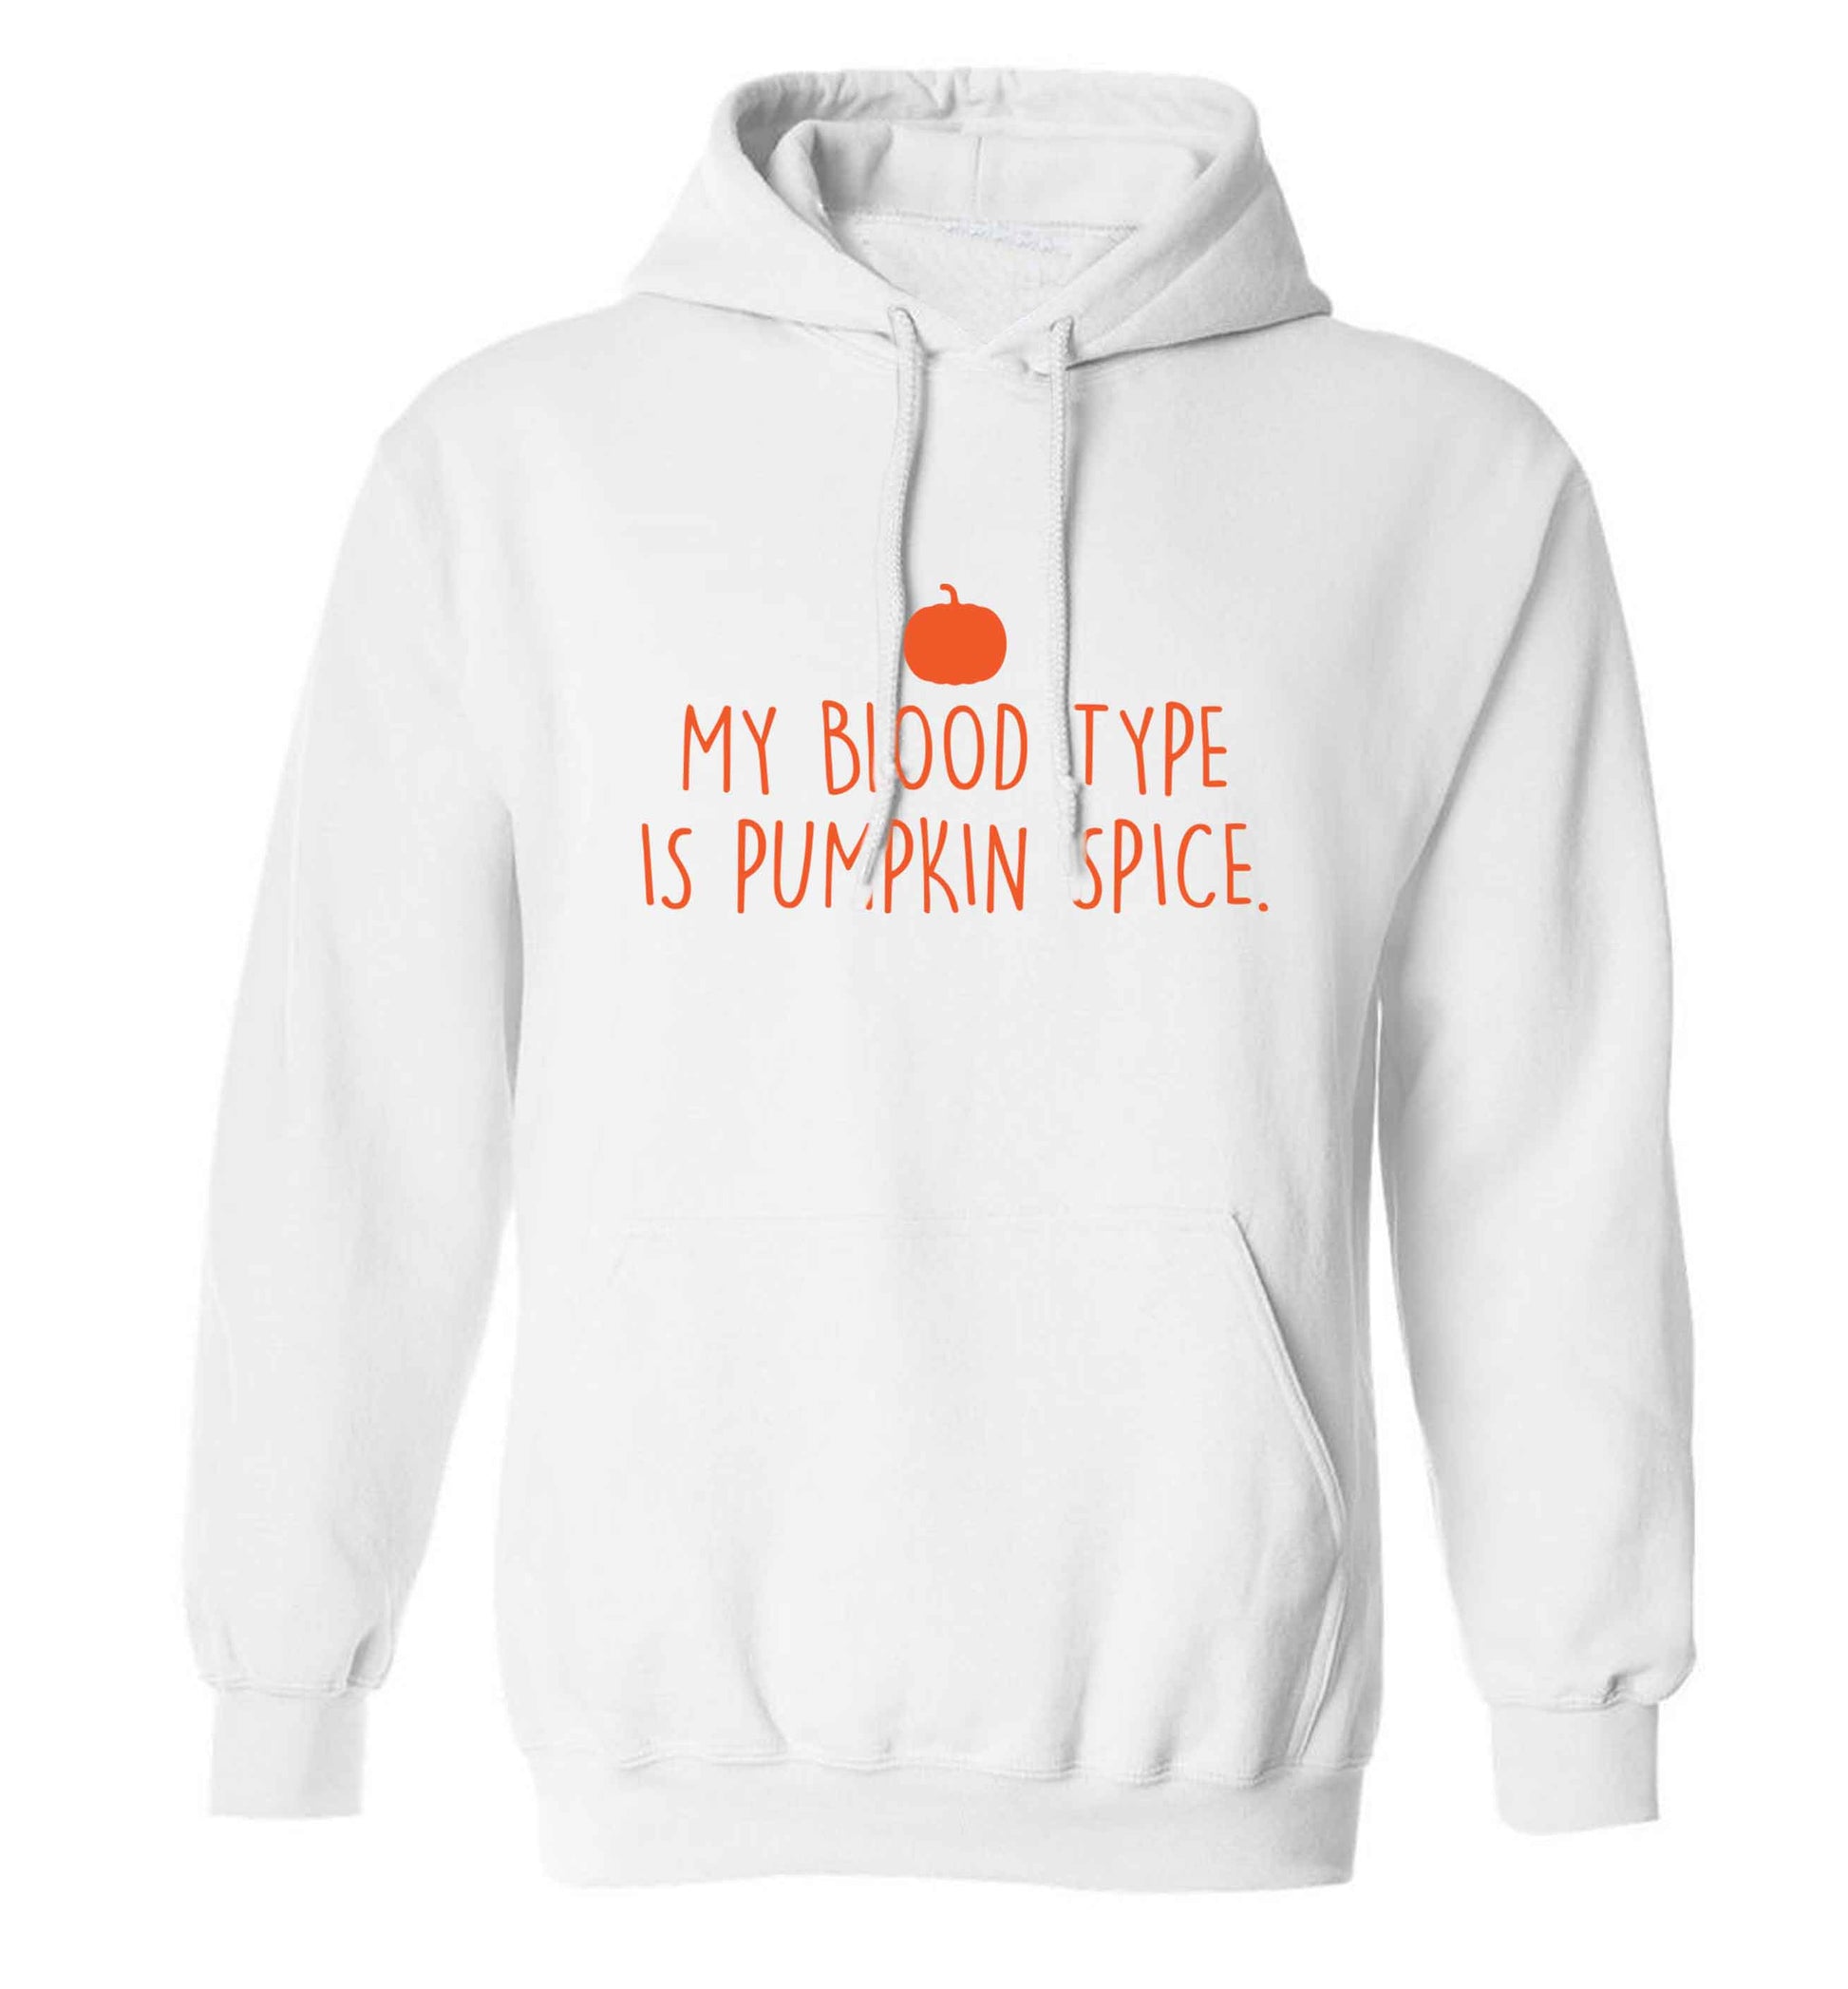 Let Be Pumpkin Spice adults unisex white hoodie 2XL